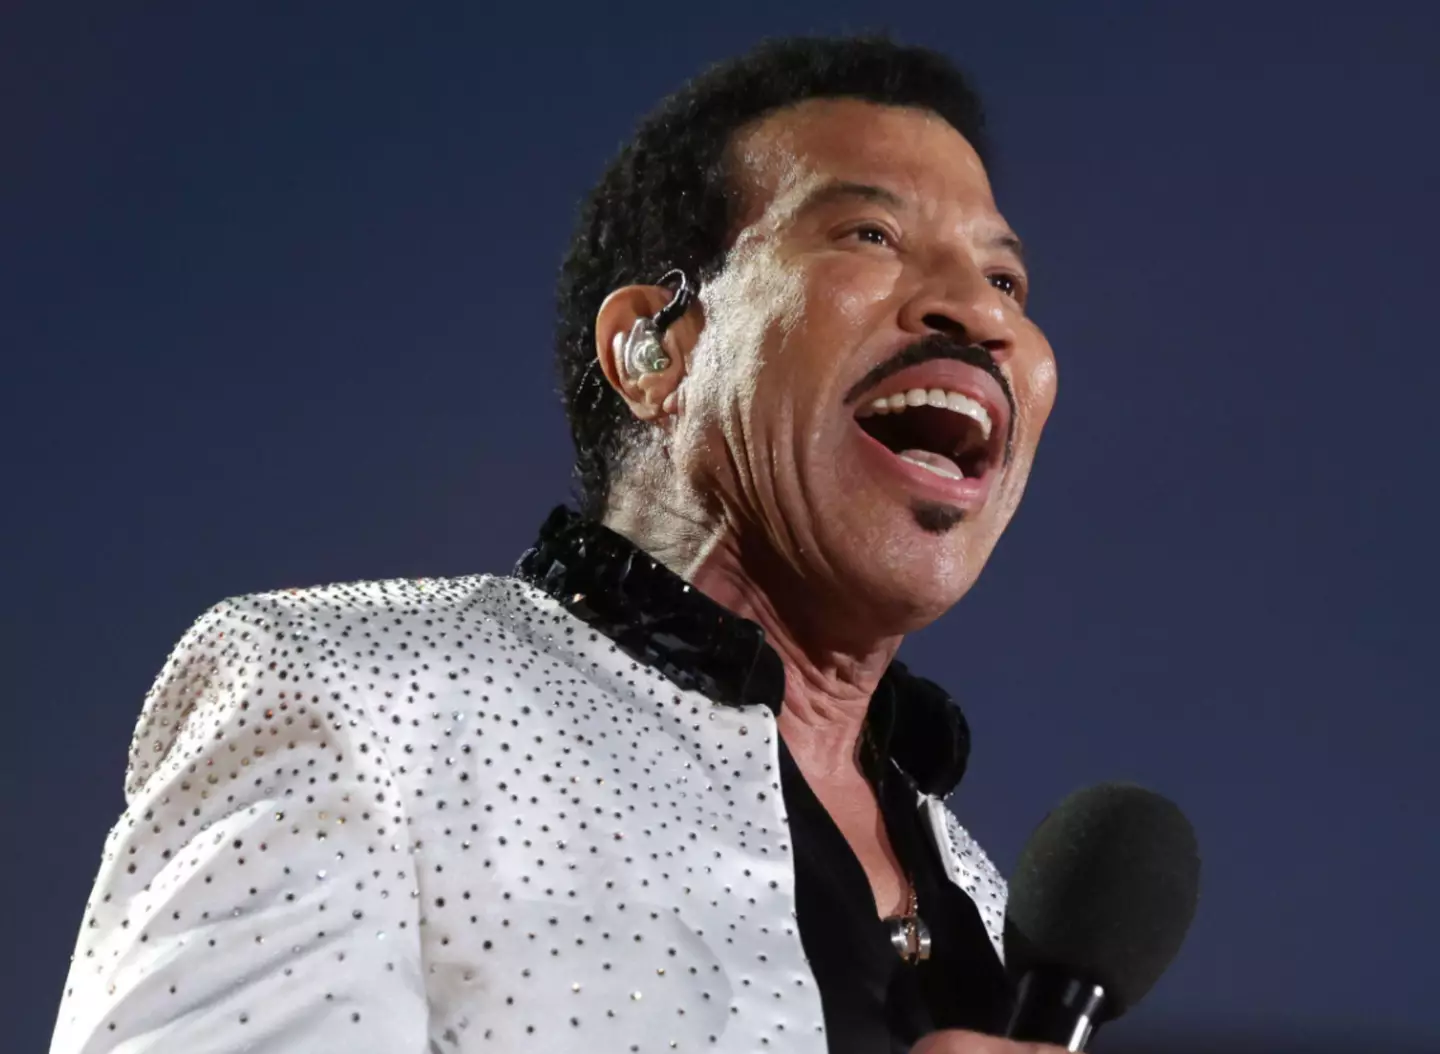 Lionel Richie was among a number of artists who performed at the coronation.